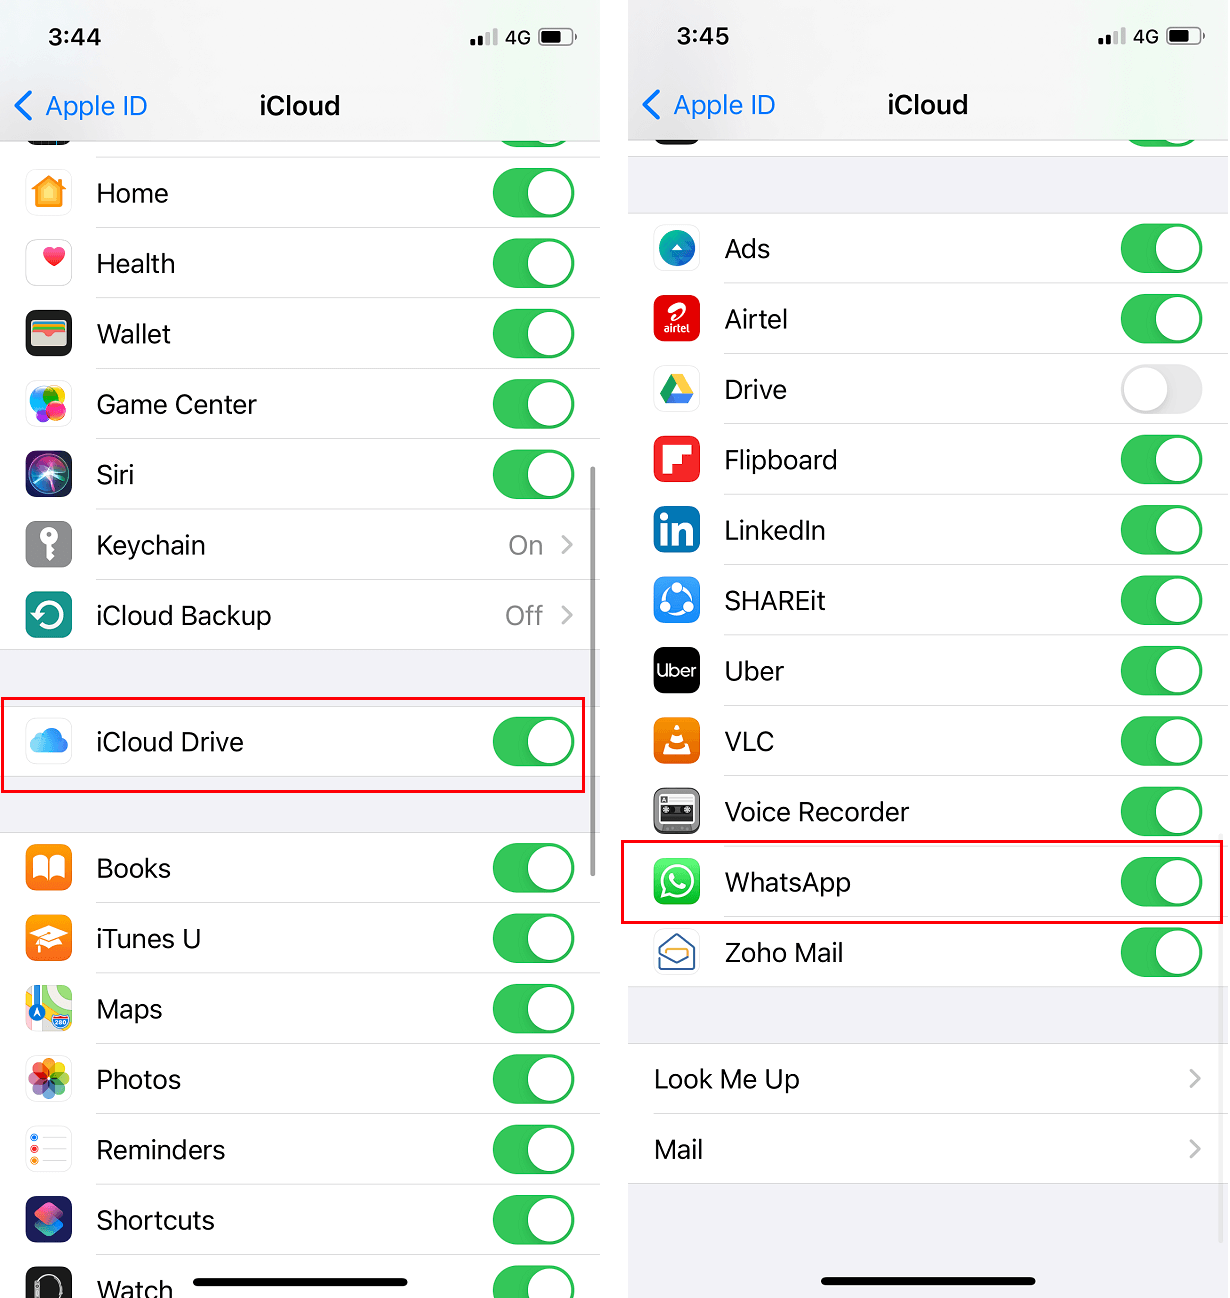 Making sure that iCloud is up and active